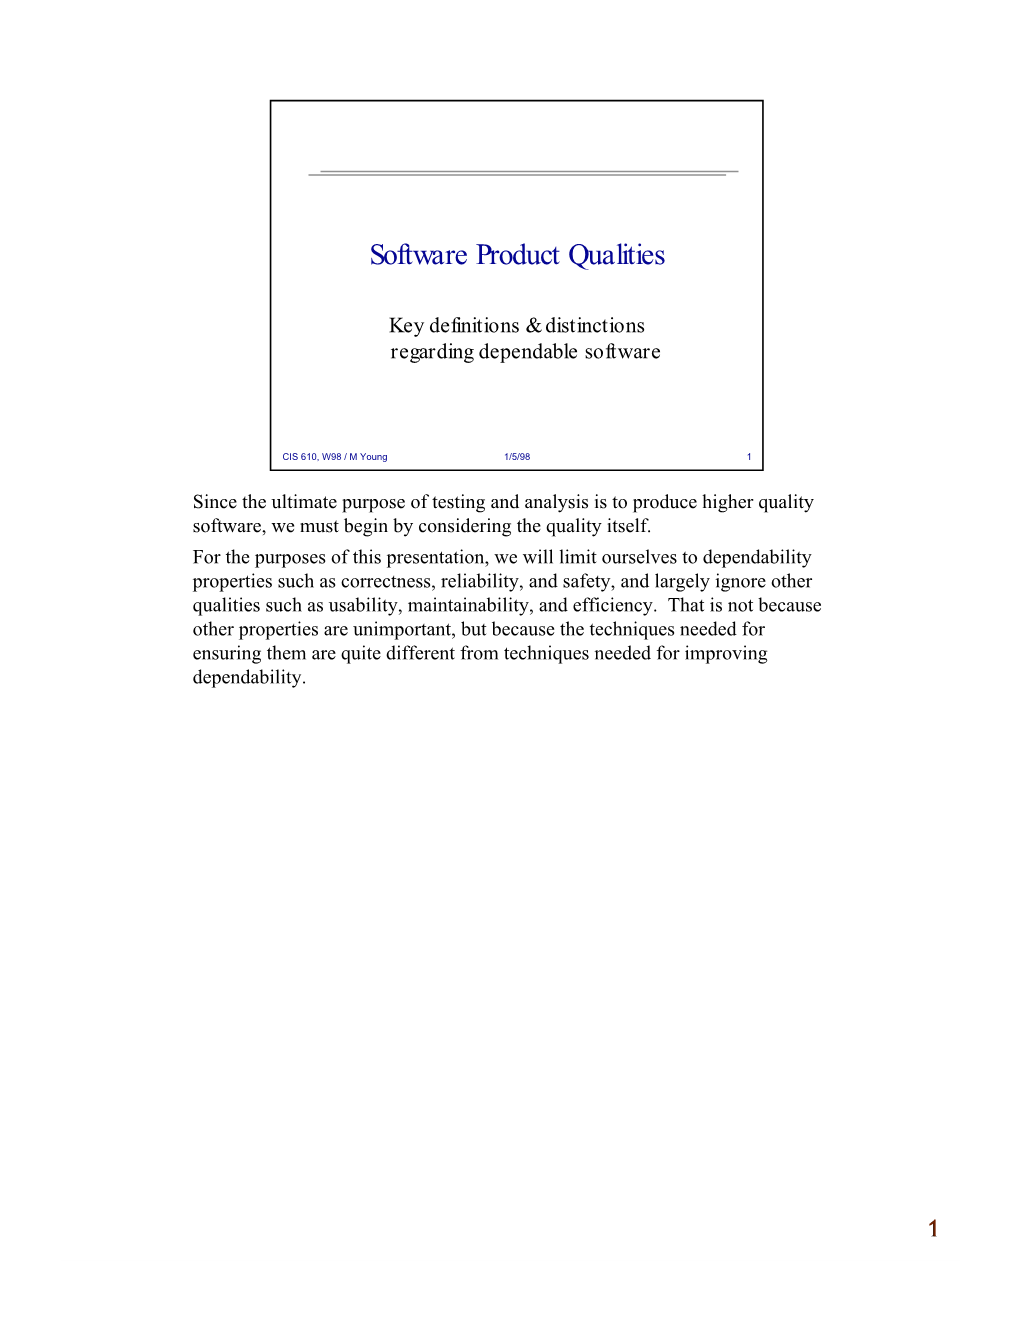 Software Dependability Qualities